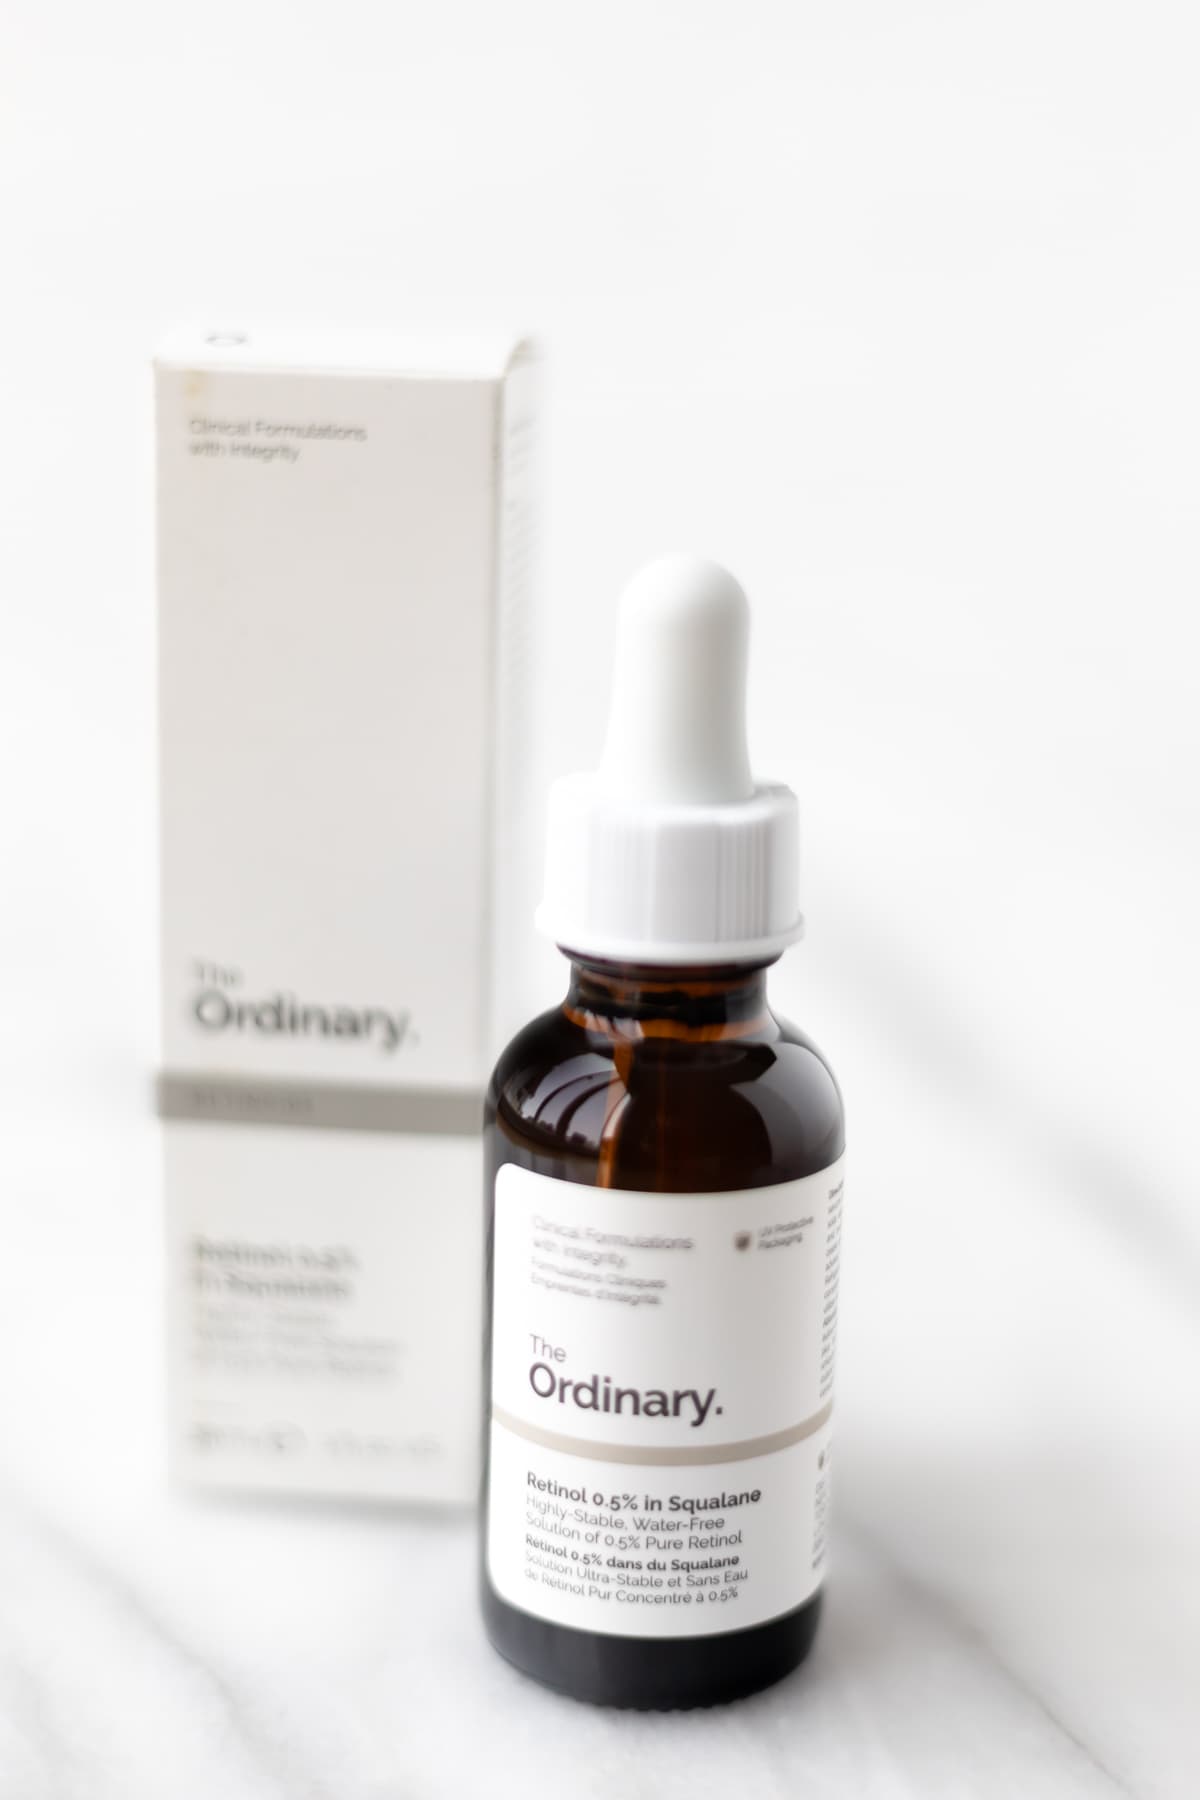 The Ordinary Retinol 0.5% bottle and box on a marble table.